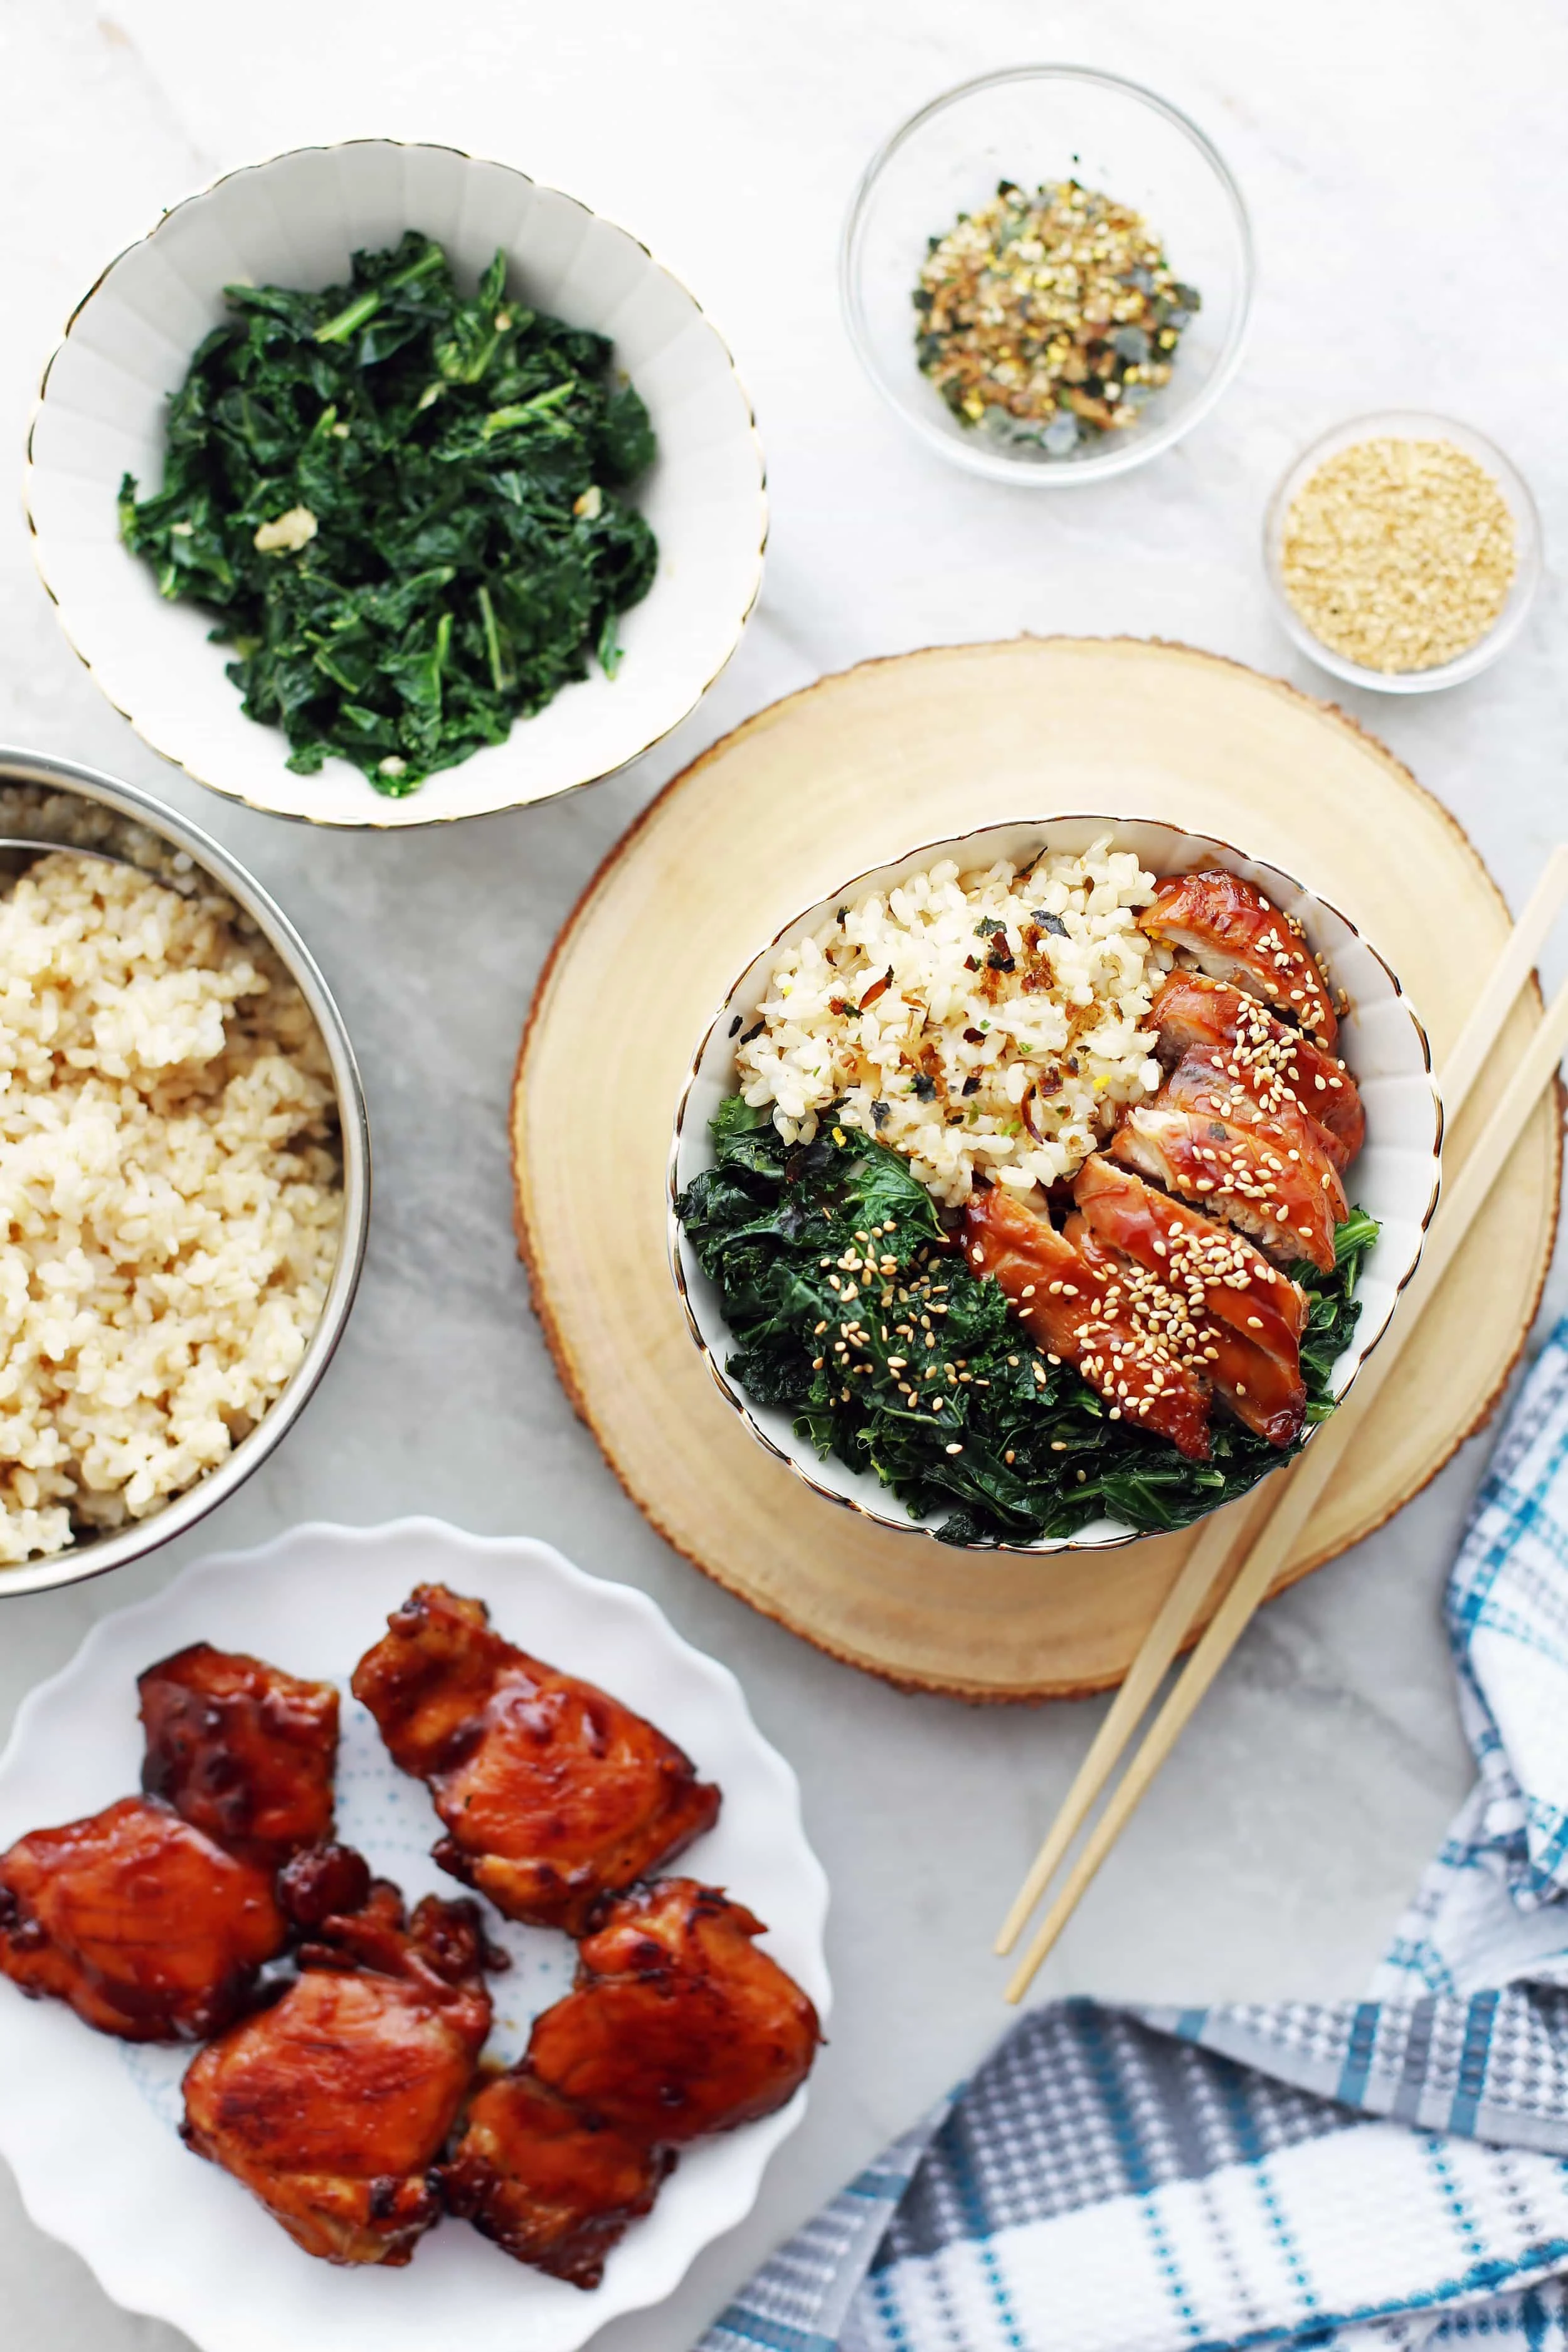 Overhead shot of a bowl of teriyaki chicken with garlicky kale and brown rice, a plate of teriyaki chicken thighs, a bowl of brown rice, and seasonings.